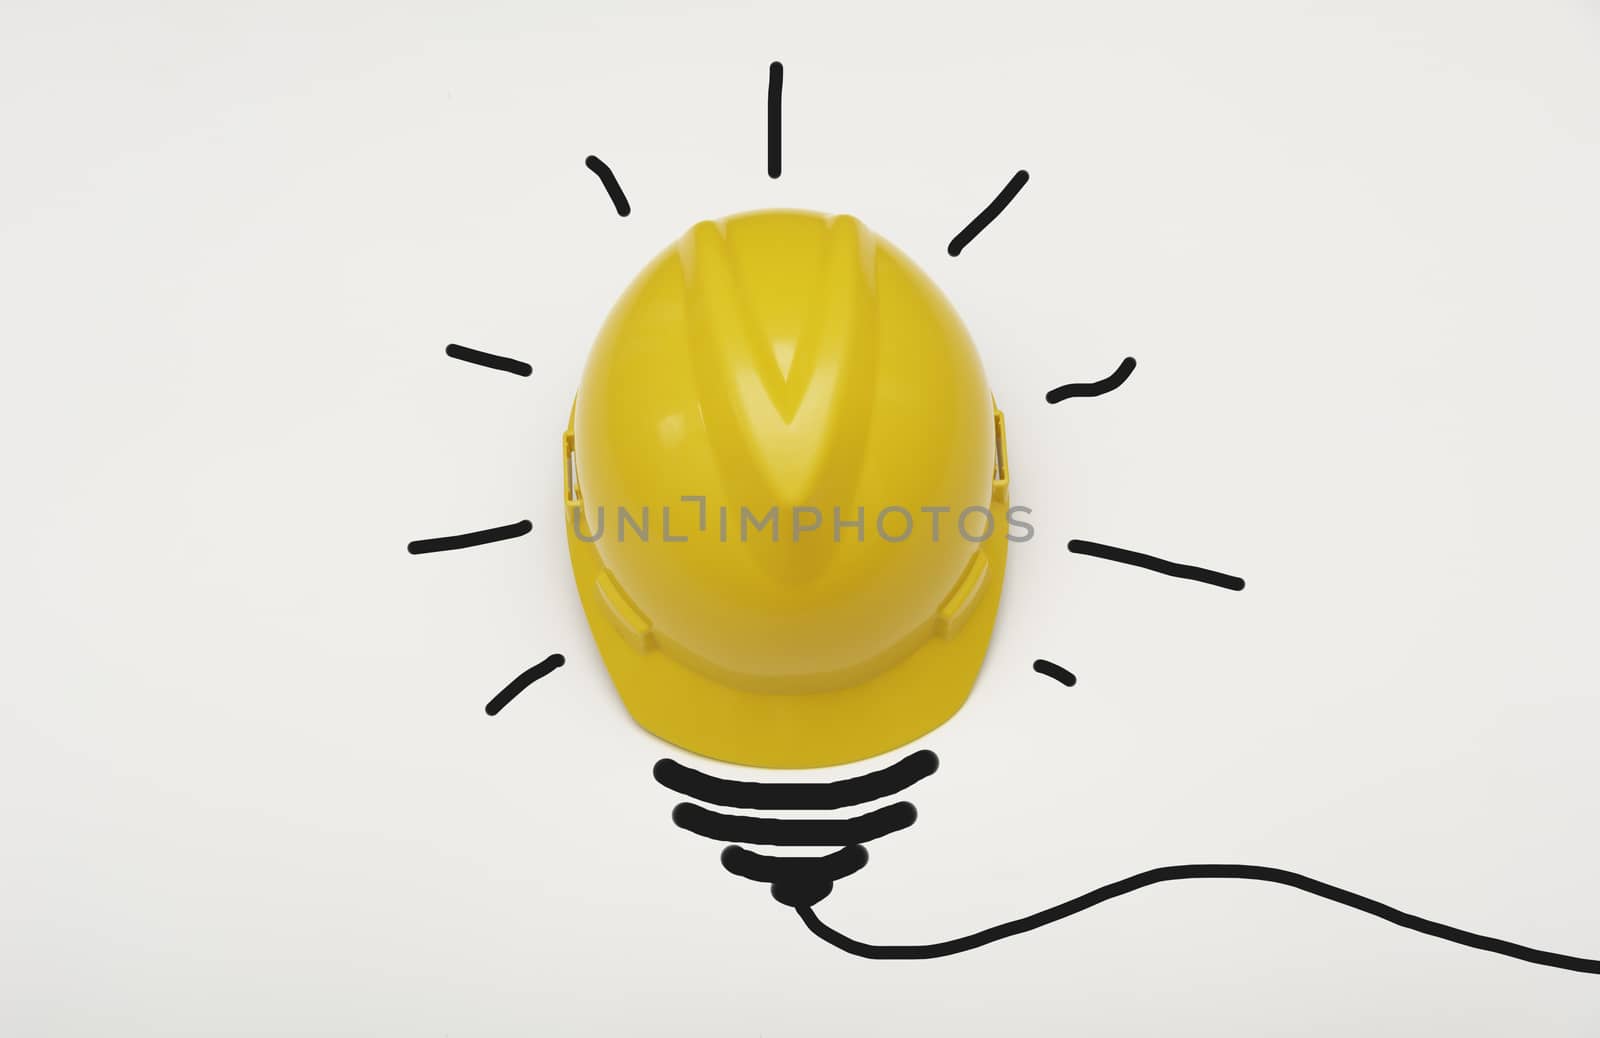 Concept idea with safety helmet light bulb isolate on white background